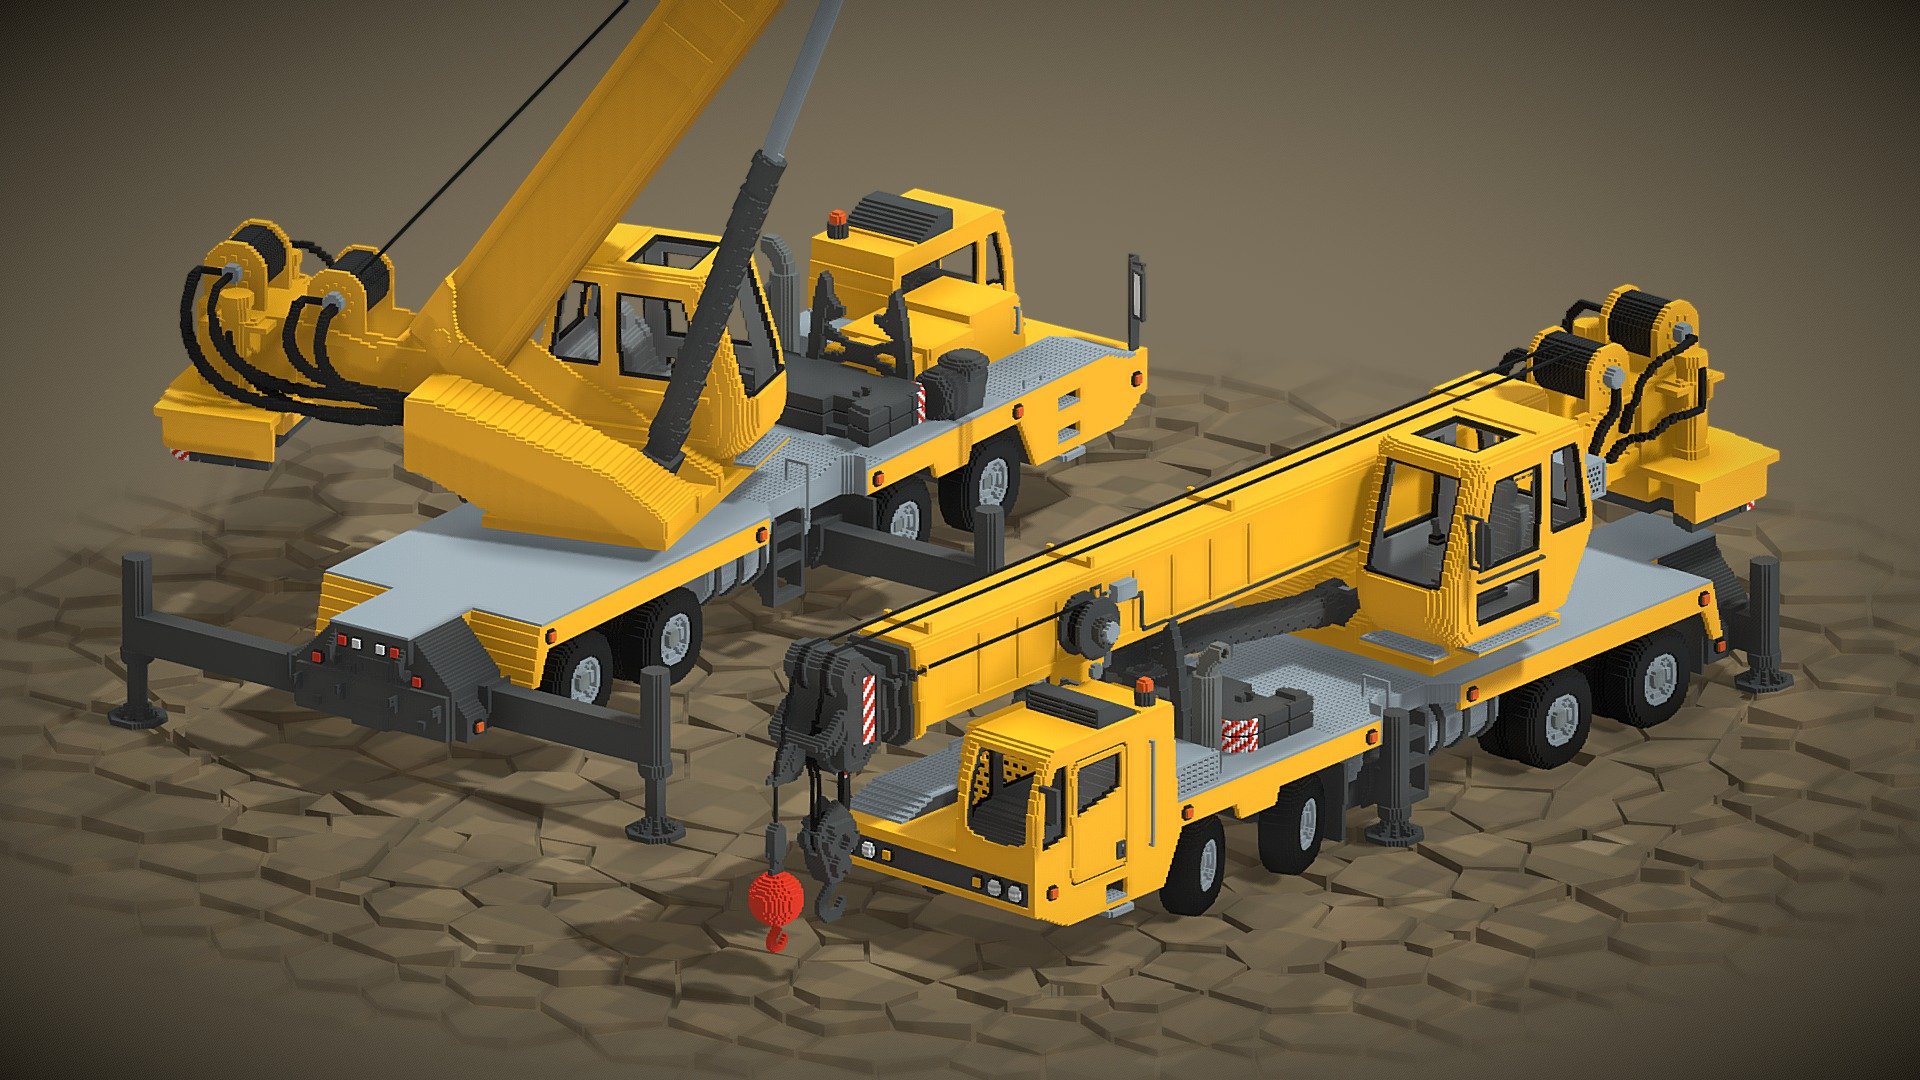 Voxel Crane Truck high details 3D model created by Shubbak3D use MagicaVoxel Editor.



This model composed of 28 parts:





Technical Details:

All Formats Size: 59.8 MB

Zip File Size: 9.74 MB

Polys Count: 129410

Verts Count: 189002

Created in MagicaVoxel Editor version 0.99.7

Available Formats: .vox (MagicaVoxel) .max (two 3ds max 2021 defaut files, standerd truck and extended truck) .qb .obj + mtl .fbx

Your feedback and rating are important for us! - Voxel Crane Truck - Buy Royalty Free 3D model by SHUBBAK3D 3d model